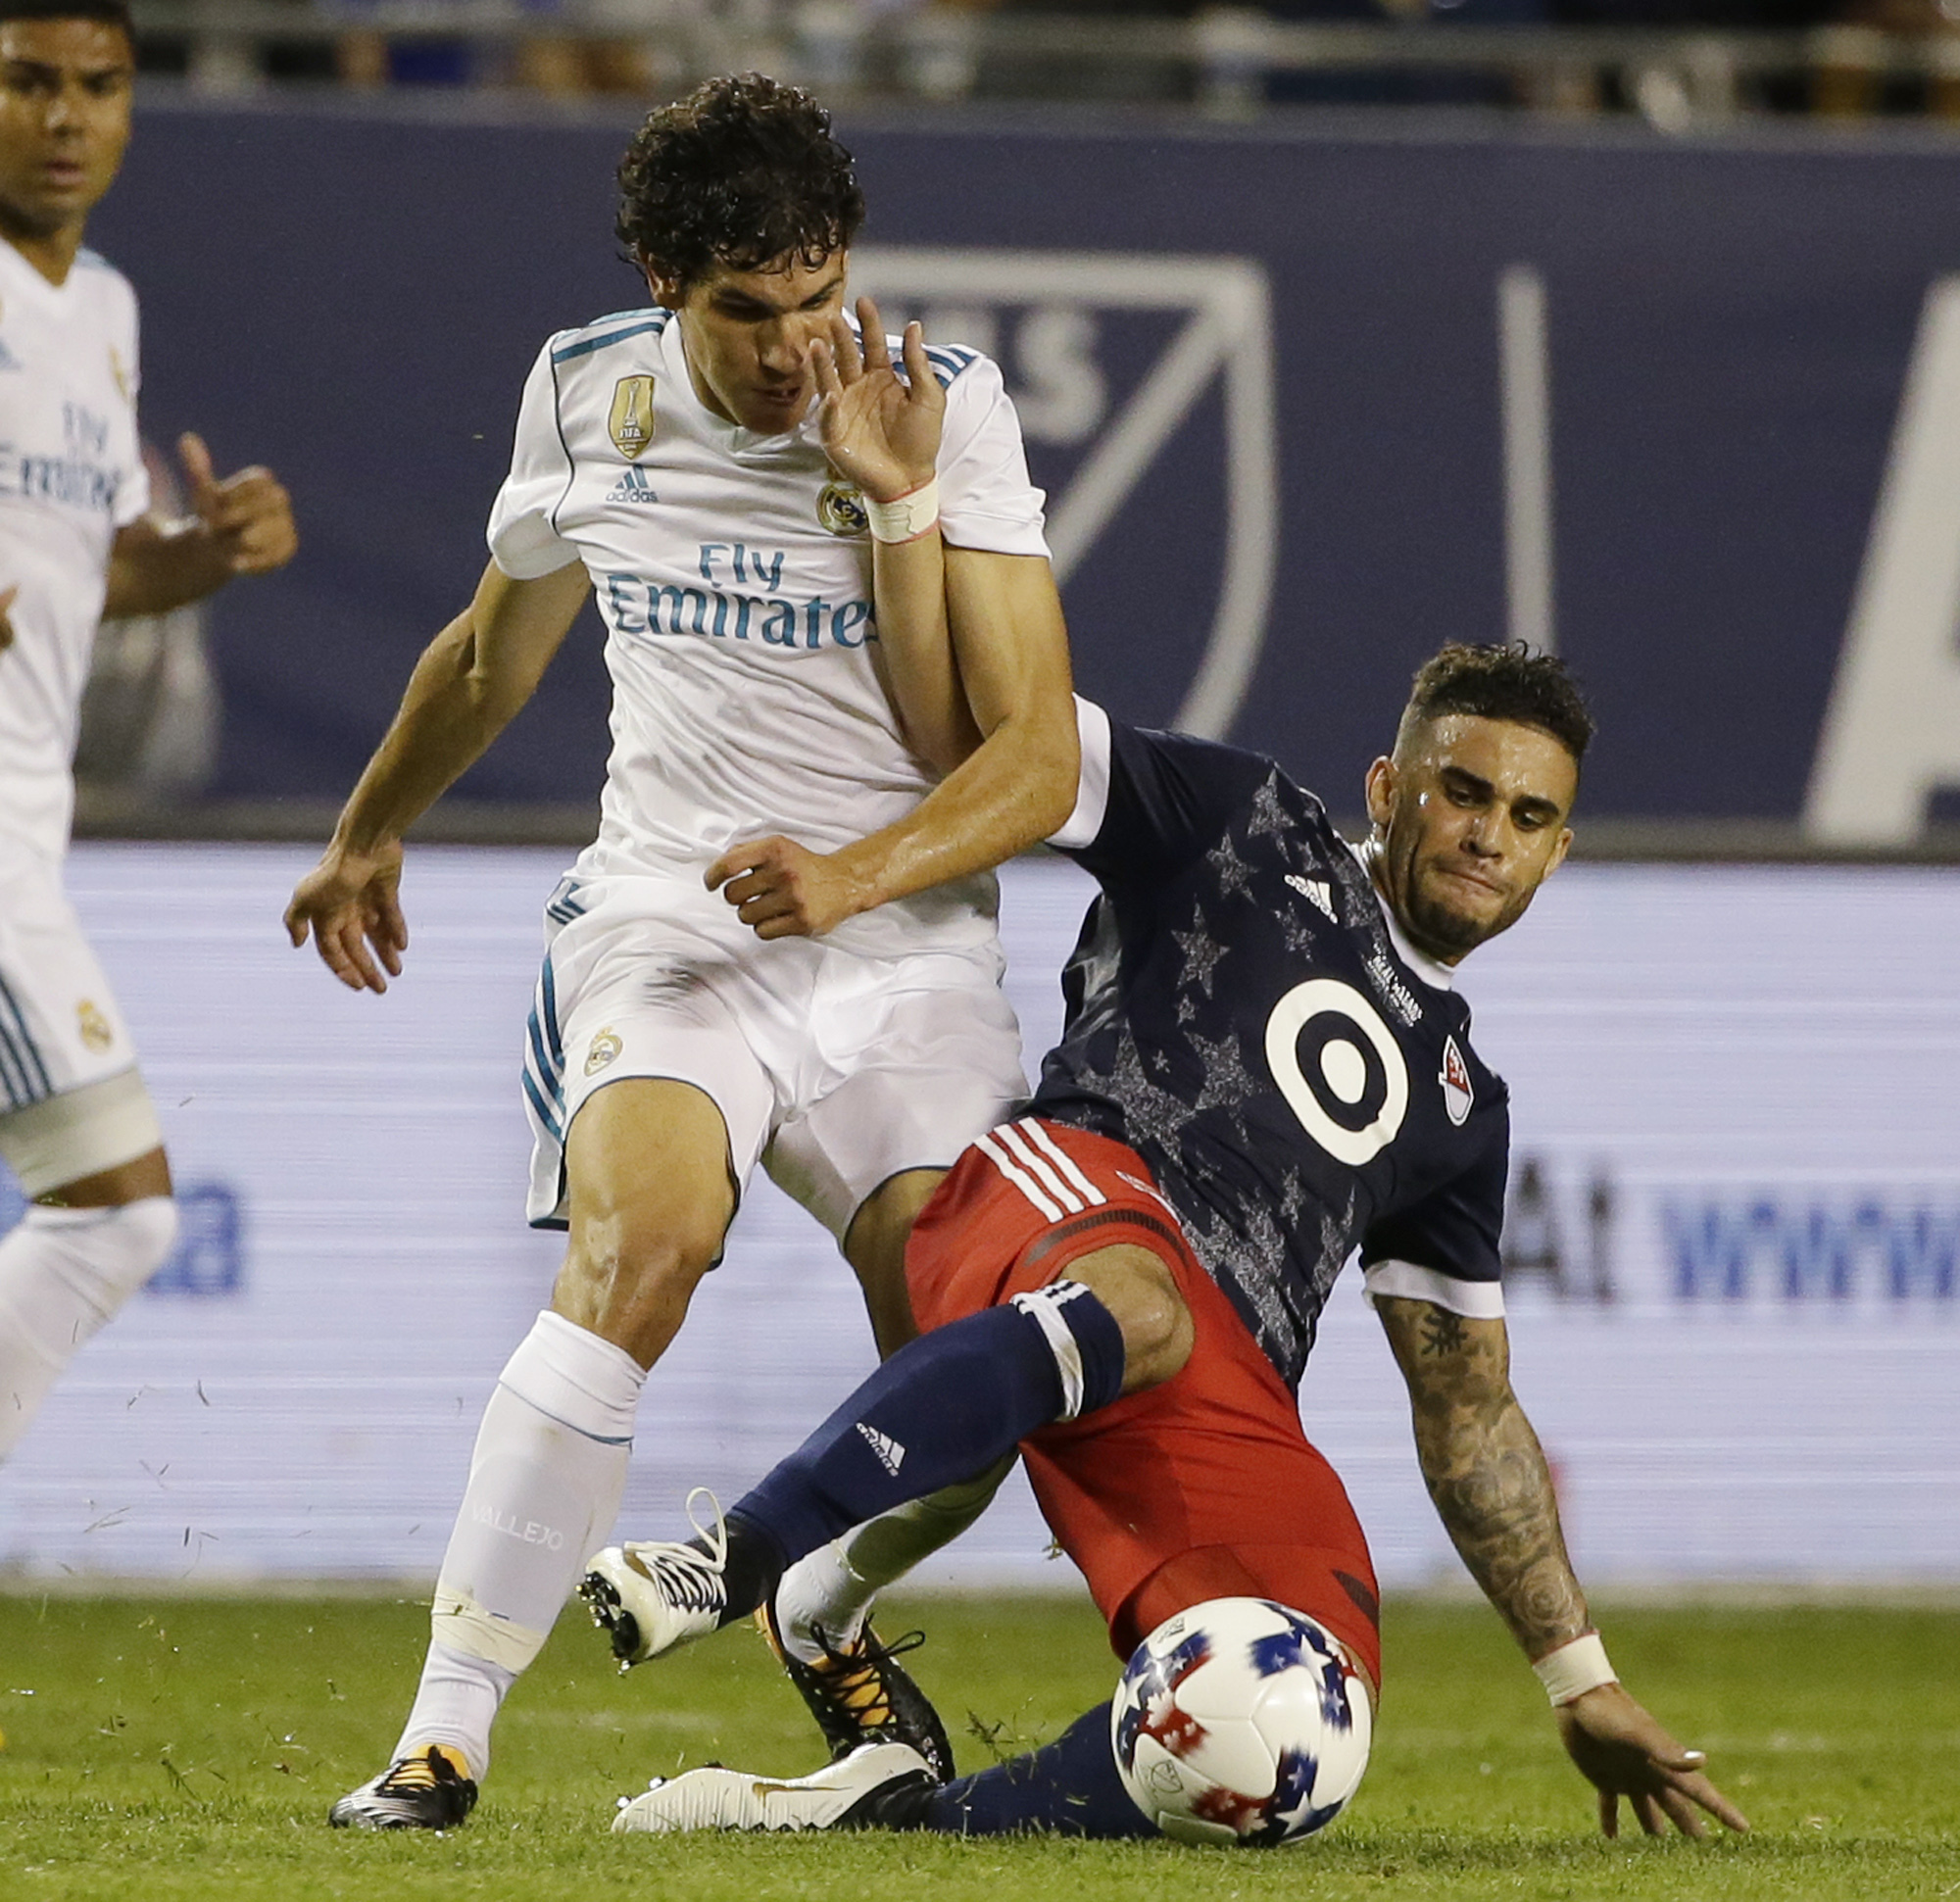 MLS All-Star footballer Dom Dwyer tackles a Real Madrid player